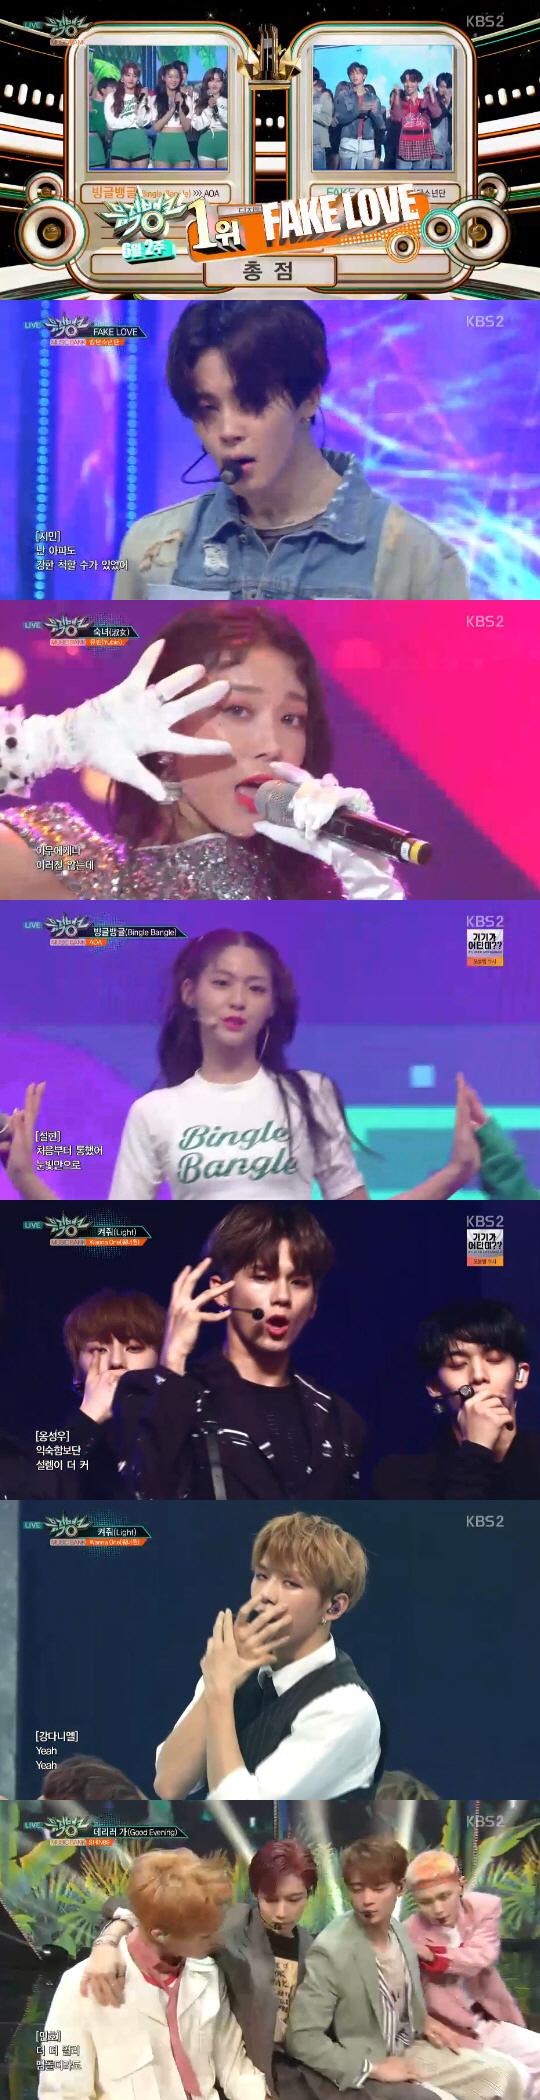 <p>In KBS 2 TV Music Bank broadcasted on the 8 afternoon, Dark & ​​amp; Wild broke AOAs Kururi Bangle at FAKE LOVE and occupied the 1st place. With this, Dark & ​​amp; Wild achieved 10 crowns of music broadcasting.</p><p>On this day Dark & ​​amp; Wild gave a showy performance and a passionate stage through FAKE LOVE and proved the dignity of Global Idol. Dark & ​​amp; Wild, who went up to the top spot, made a part celebrating ceremony that I mentioned earlier in my pledge.</p><p>Yubin and Wanna One, Fromis 9 s comeback stage was also released. Yubin from Wonder Girls who went on for his first solo debut for the first time in 11 years made a comeback with the title song Women. Women is a genre song in the genre of City Pop centered on synths and keyboards, drum machine sounds, in urban pop music that was popular in the 1980s. Yubin who was acting as a rapper overflowing the things of Wonder Girls boasted reversing charm boasting vocal ability and flashy lady beauty through women.</p><p>Wanna One who was further upgraded and showed off the unit stage with the title song Kyojo. Kyojo is a song that depicts a story of perfect love that can not be divided up-dance songs of pop tempo and pop-based plugs and guitar sounds stand out. On the stage Wanna One s curling crowd and deadly performances stand out. It was also released on the stage of 11 of Wanna One Unit Namba One (Bakujifun, Bejin Young, LA Igwin Lin), Kangaroo of Triple Positions (River Daniel, Kim Jae-hwan, Shin Shin).</p><p>Shoot Buds Fromis 9 came back to the title song Doki Doki and recorded song The girl in the 22nd century. Doki Doki is a song of the fusion synth pop genre where a unique sound and voice of Fromis 9 harmonize. Fromis 9 concentrated love while listening to a fresh and refreshing stage.</p><p>Shinys pickups and summer queen of fantastic charm Auras Bangle full of bright energy A pristine V armed with sexy charisma arbitrary, lyrical atmosphere of yen flying emphasized HOW RU TODAY which was done, Teenager where Samuels intense performance stands out, Lady who emanates passionate charm (female) was released on the stage of the childs LATATA.</p><p>Besides this, Unity also appeared by East Light, Dream Catcher, Victon, A.C. E, Khan, 24K.</p><p>Meanwhile, on this day Sorubin gave a greeting by tears to MC. I am happy that I could introduce the K pop stage every Friday and I would like to thank the people who made a valuable experience satisfactorily.Please believe in the long time of 1 year and 10 months I appreciate and love my fans and members, my family, I do not have the word of eternity, but I have learned that I feel eternal to many things I learned at Music Bank.</p>